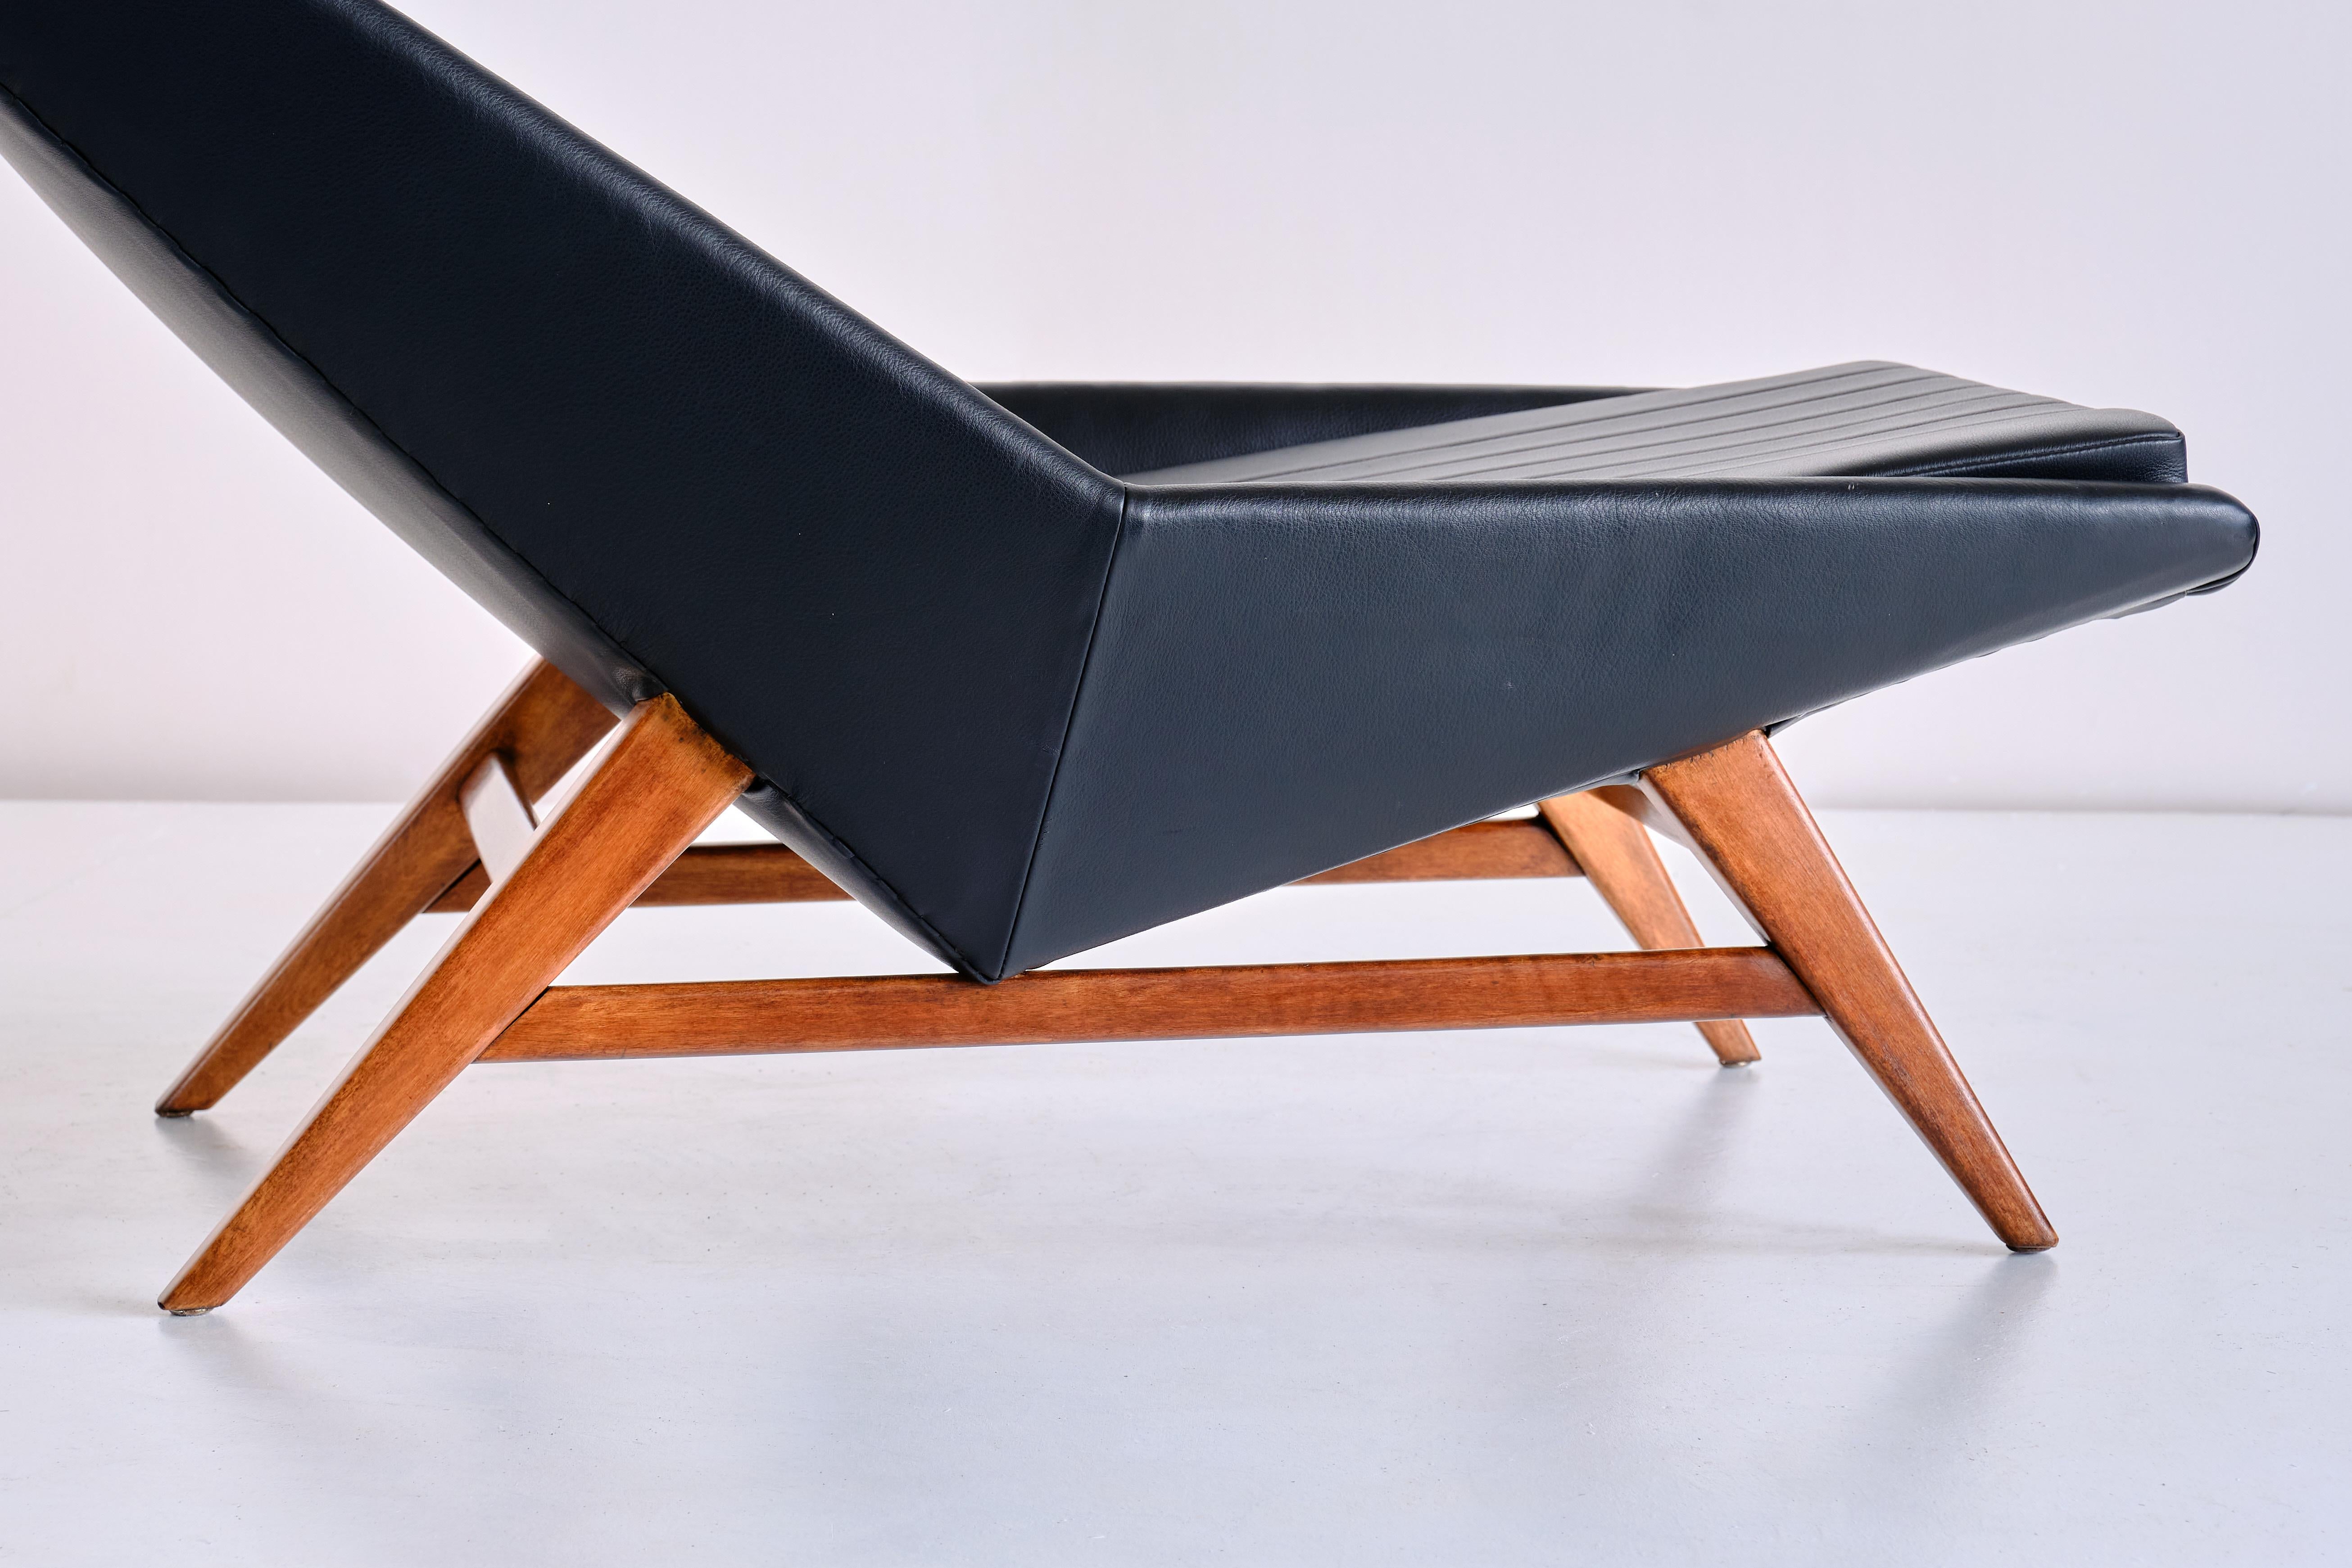 Swedish Svante Skogh Lounge Chair in Leather and Beech, AB Hjertquist & Co, Sweden, 1955 For Sale